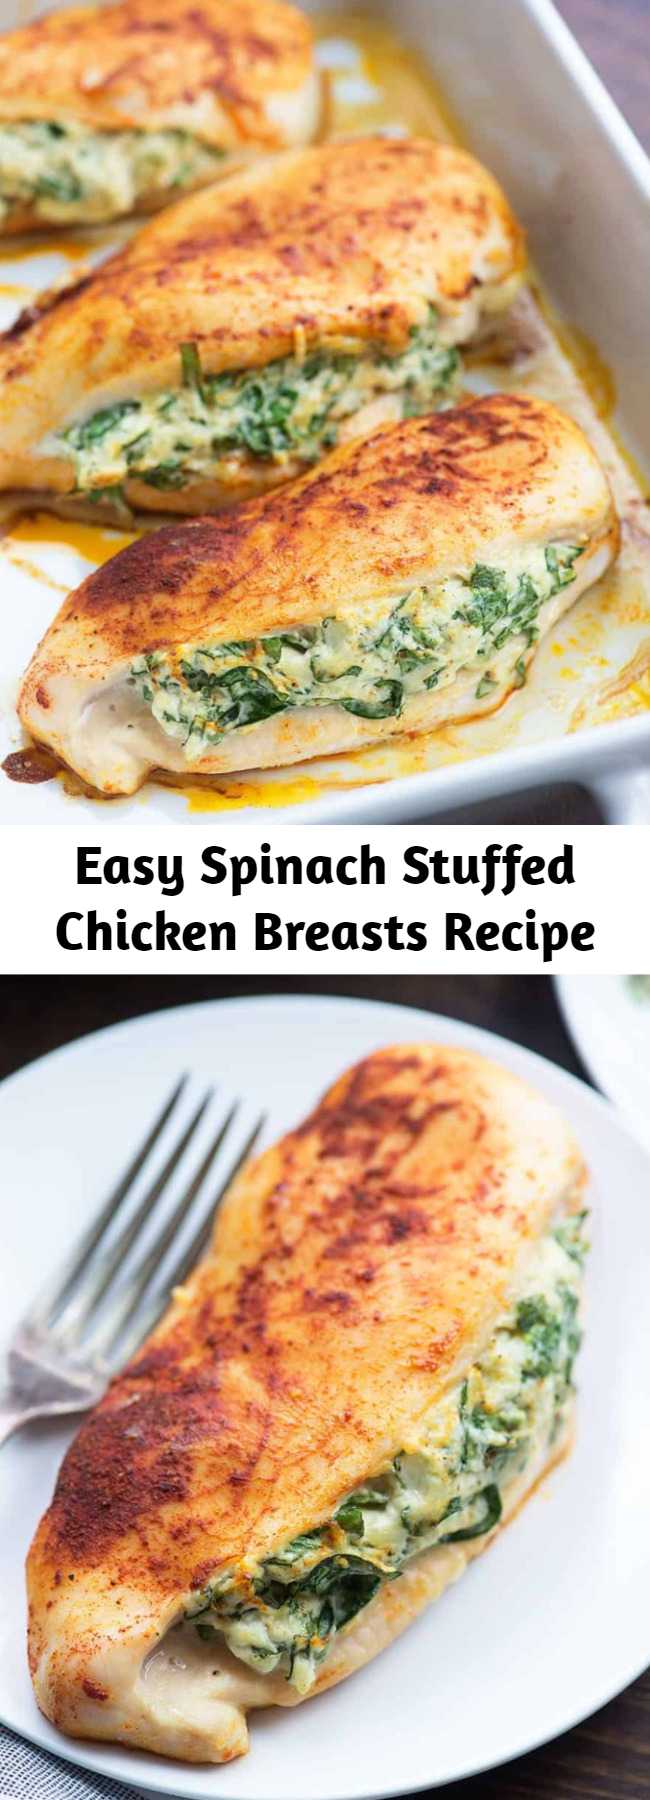 Easy Spinach Stuffed Chicken Breasts Recipe - These spinach stuffed chicken breasts are loaded with cream cheese, fresh spinach, and Parmesan cheese. It's going to be a new low carb family favorite! The cream cheese and Parmesan add a ton of flavor to this spinach stuffed chicken and the whole recipe is super quick to prepare.